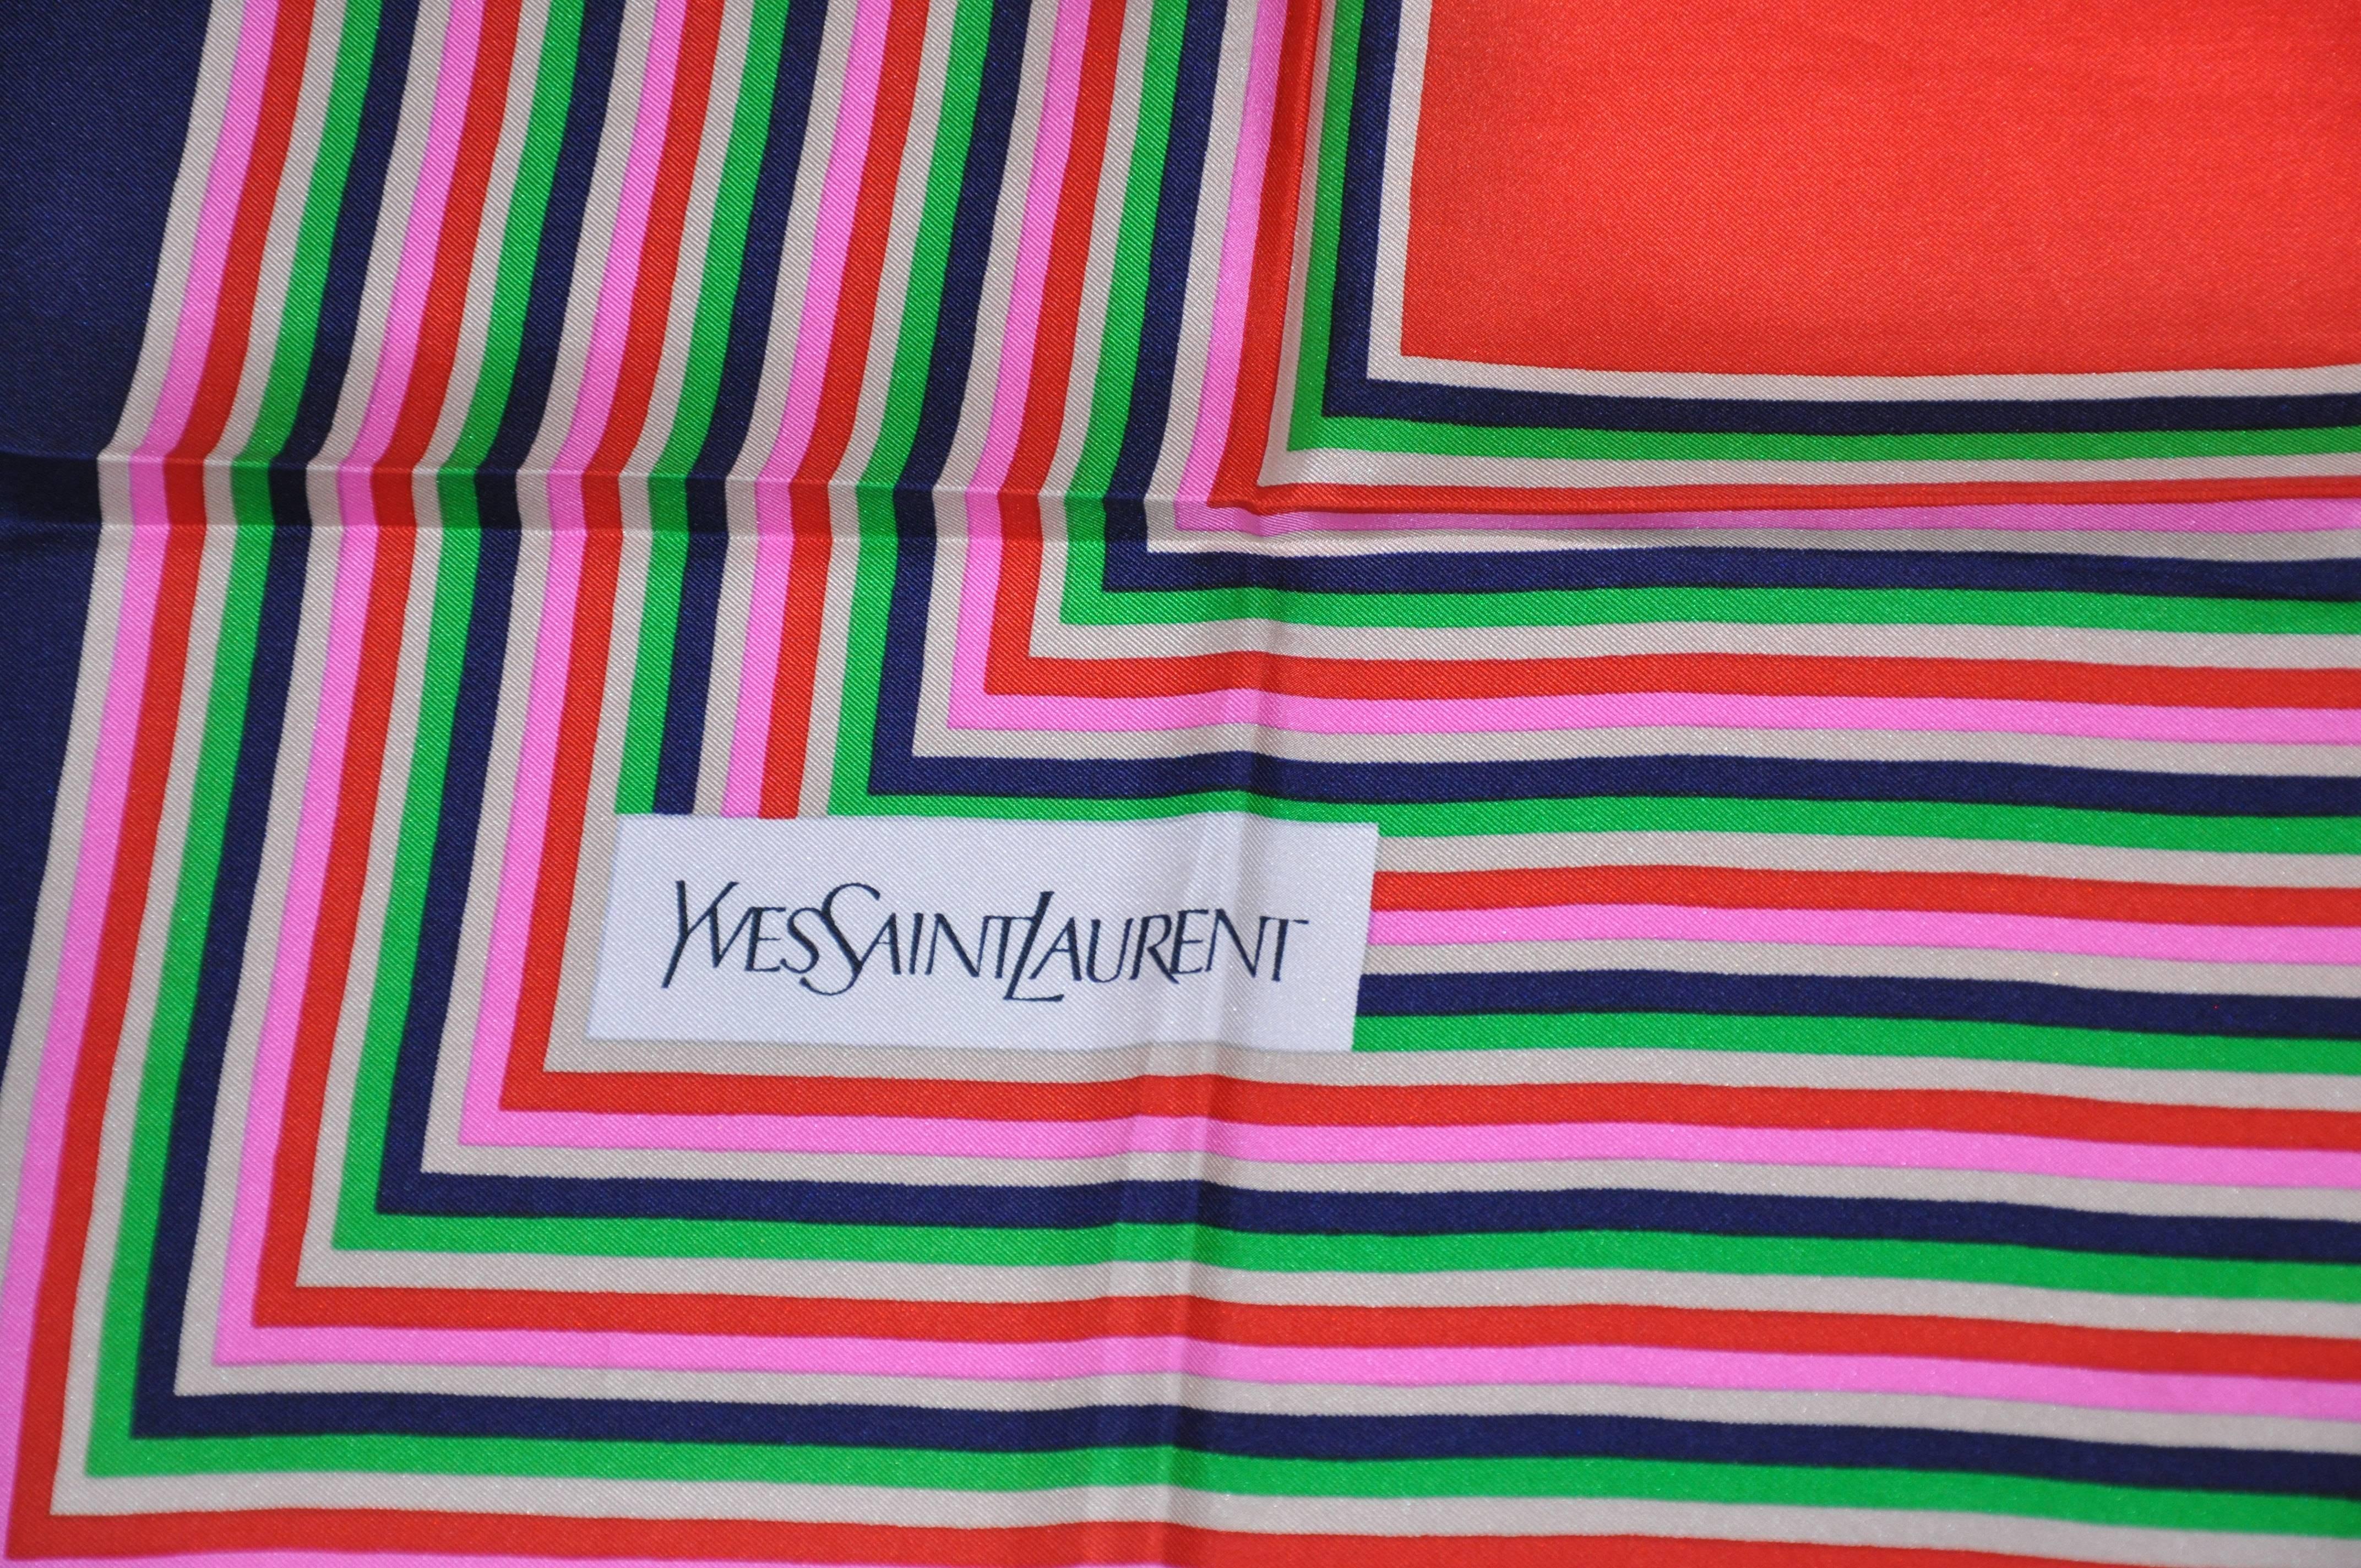        Yves Saint Laurent wonderful multi-colors of red, pink, navy, beige and green stripe silk jacquard scarf is finished with hand-rolled edges and measures 33